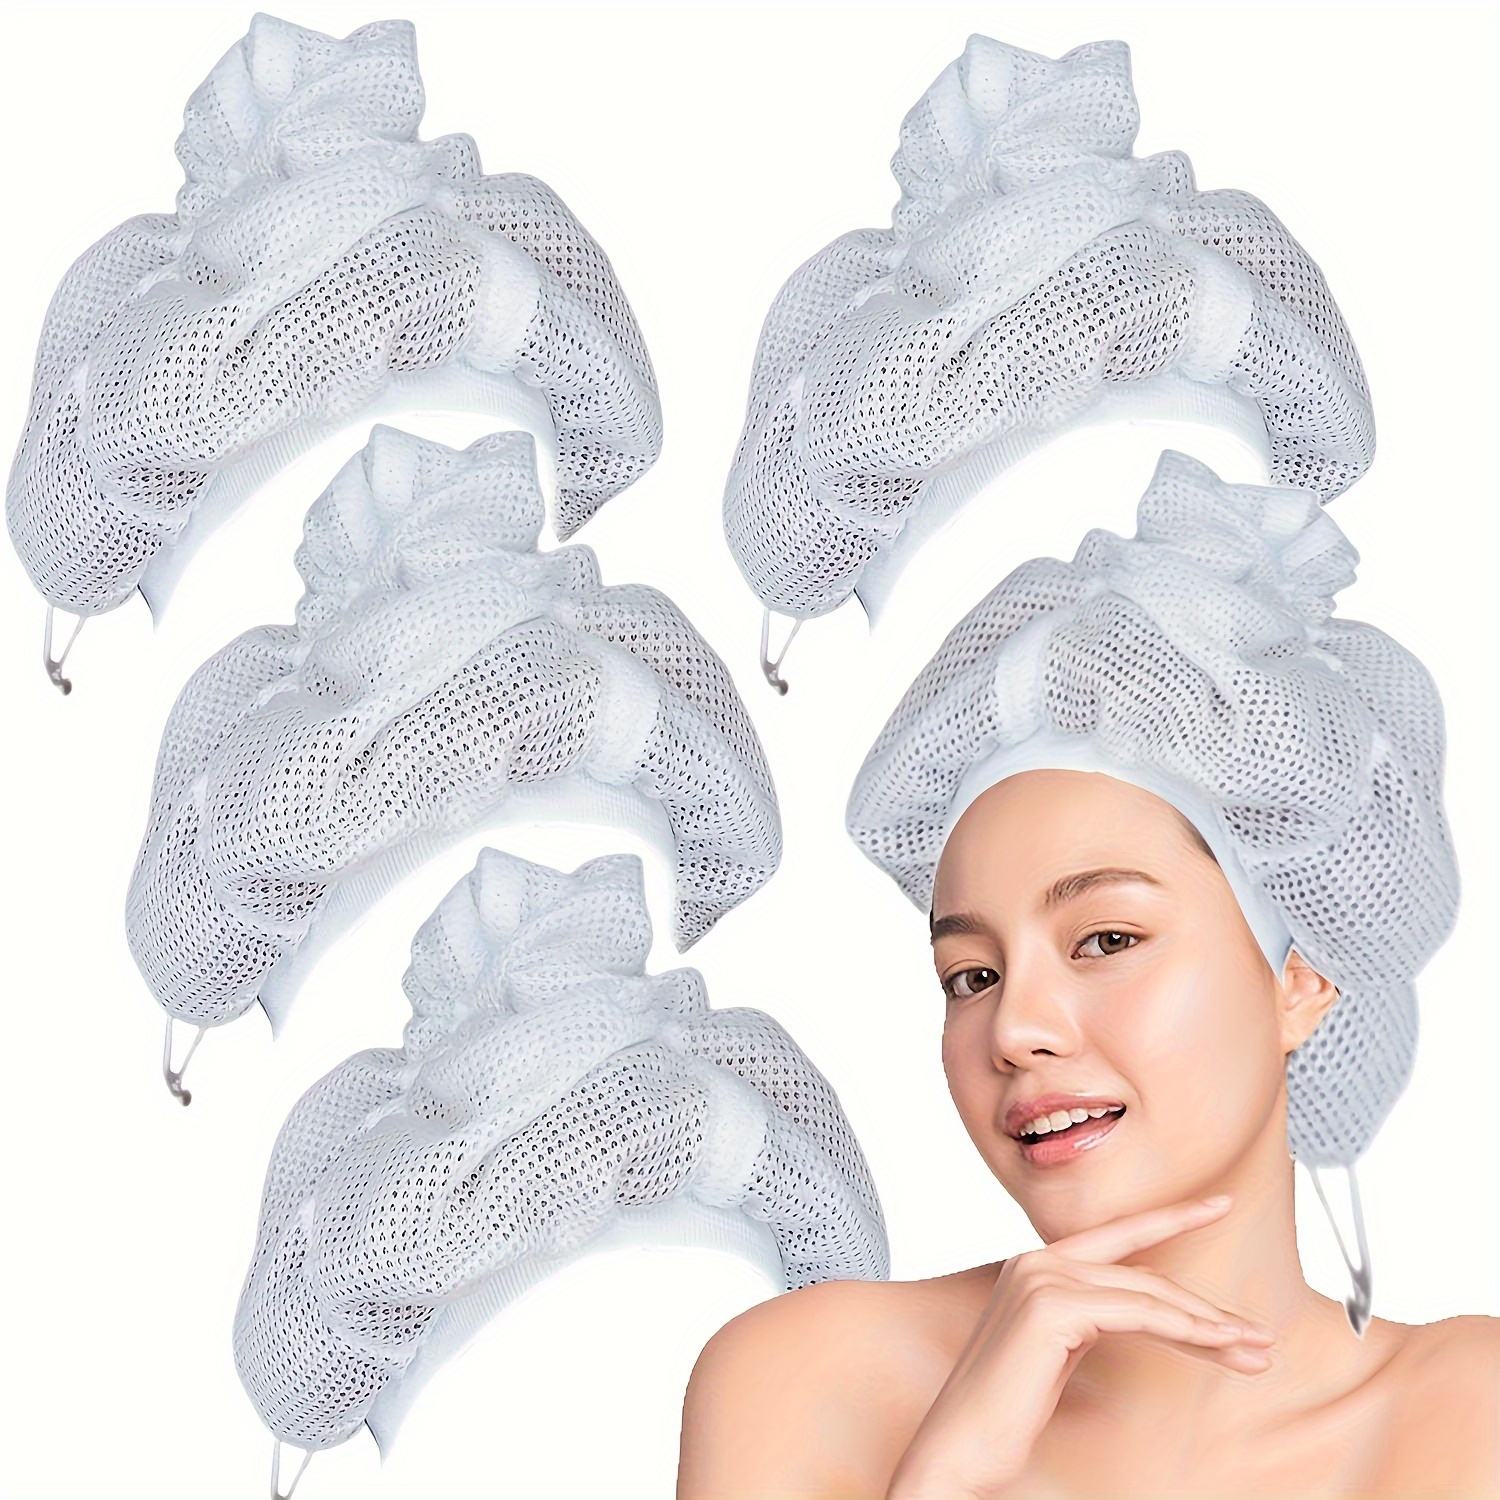 Net Plopping Cap for Drying Curly Hair, Soulta Net Plopping Cap for Drying  Curly Hair, Soulta